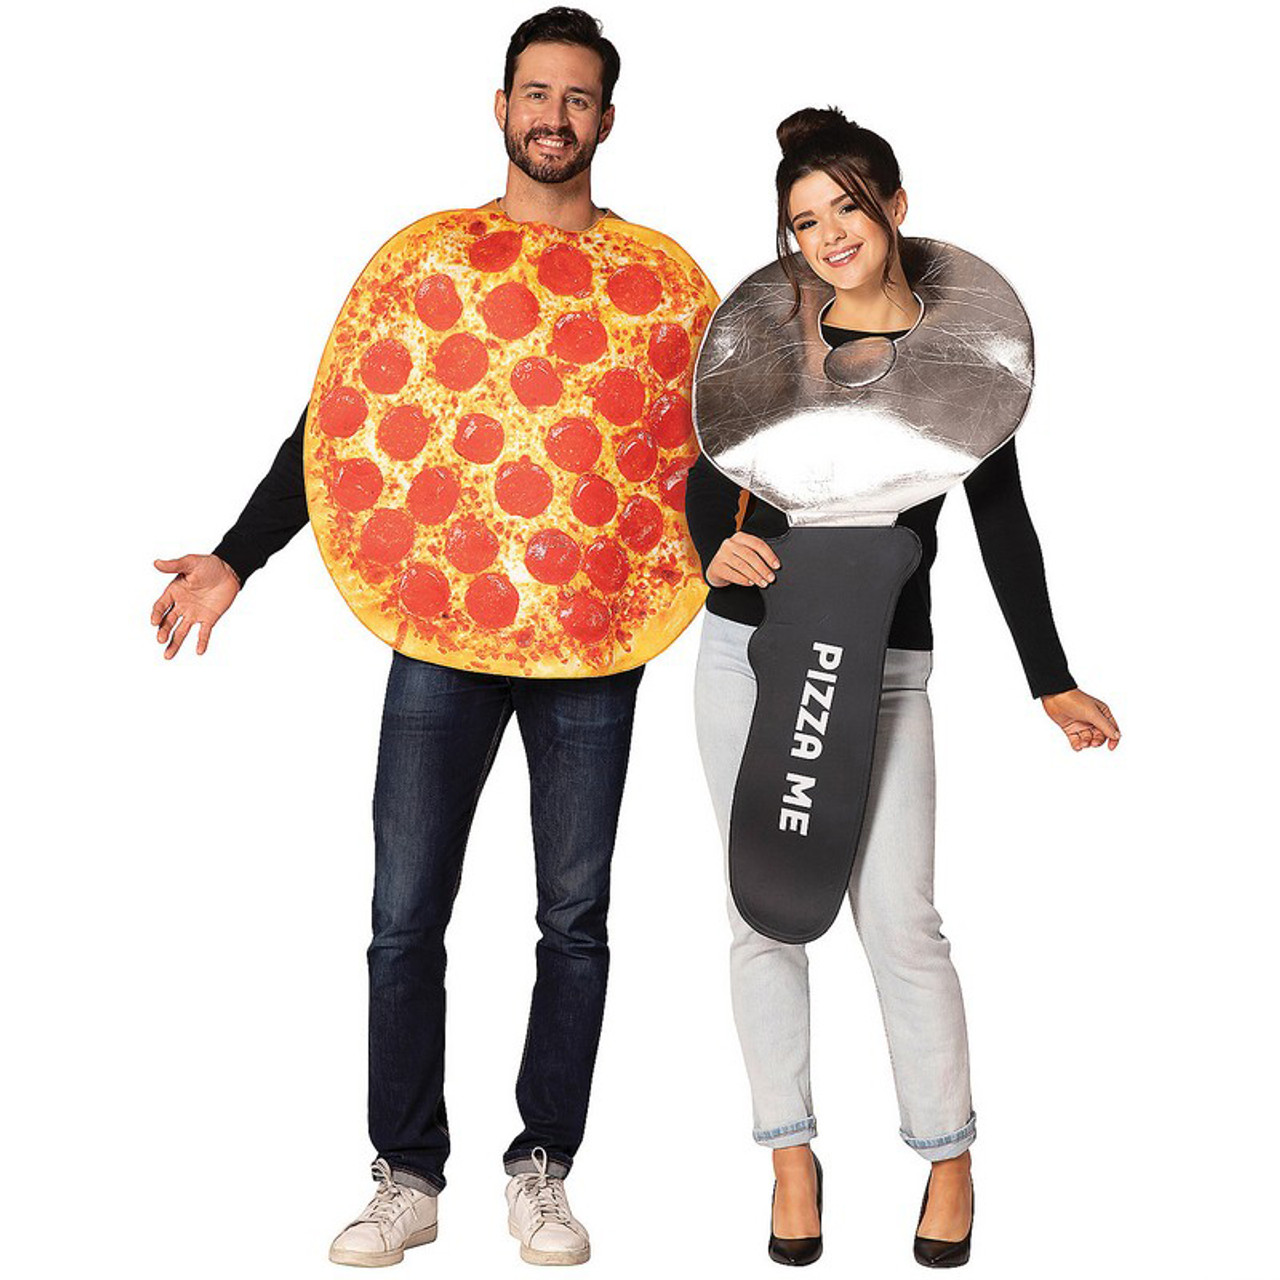 Pepperoni Pizza & Pizza Cutter Couples Costume